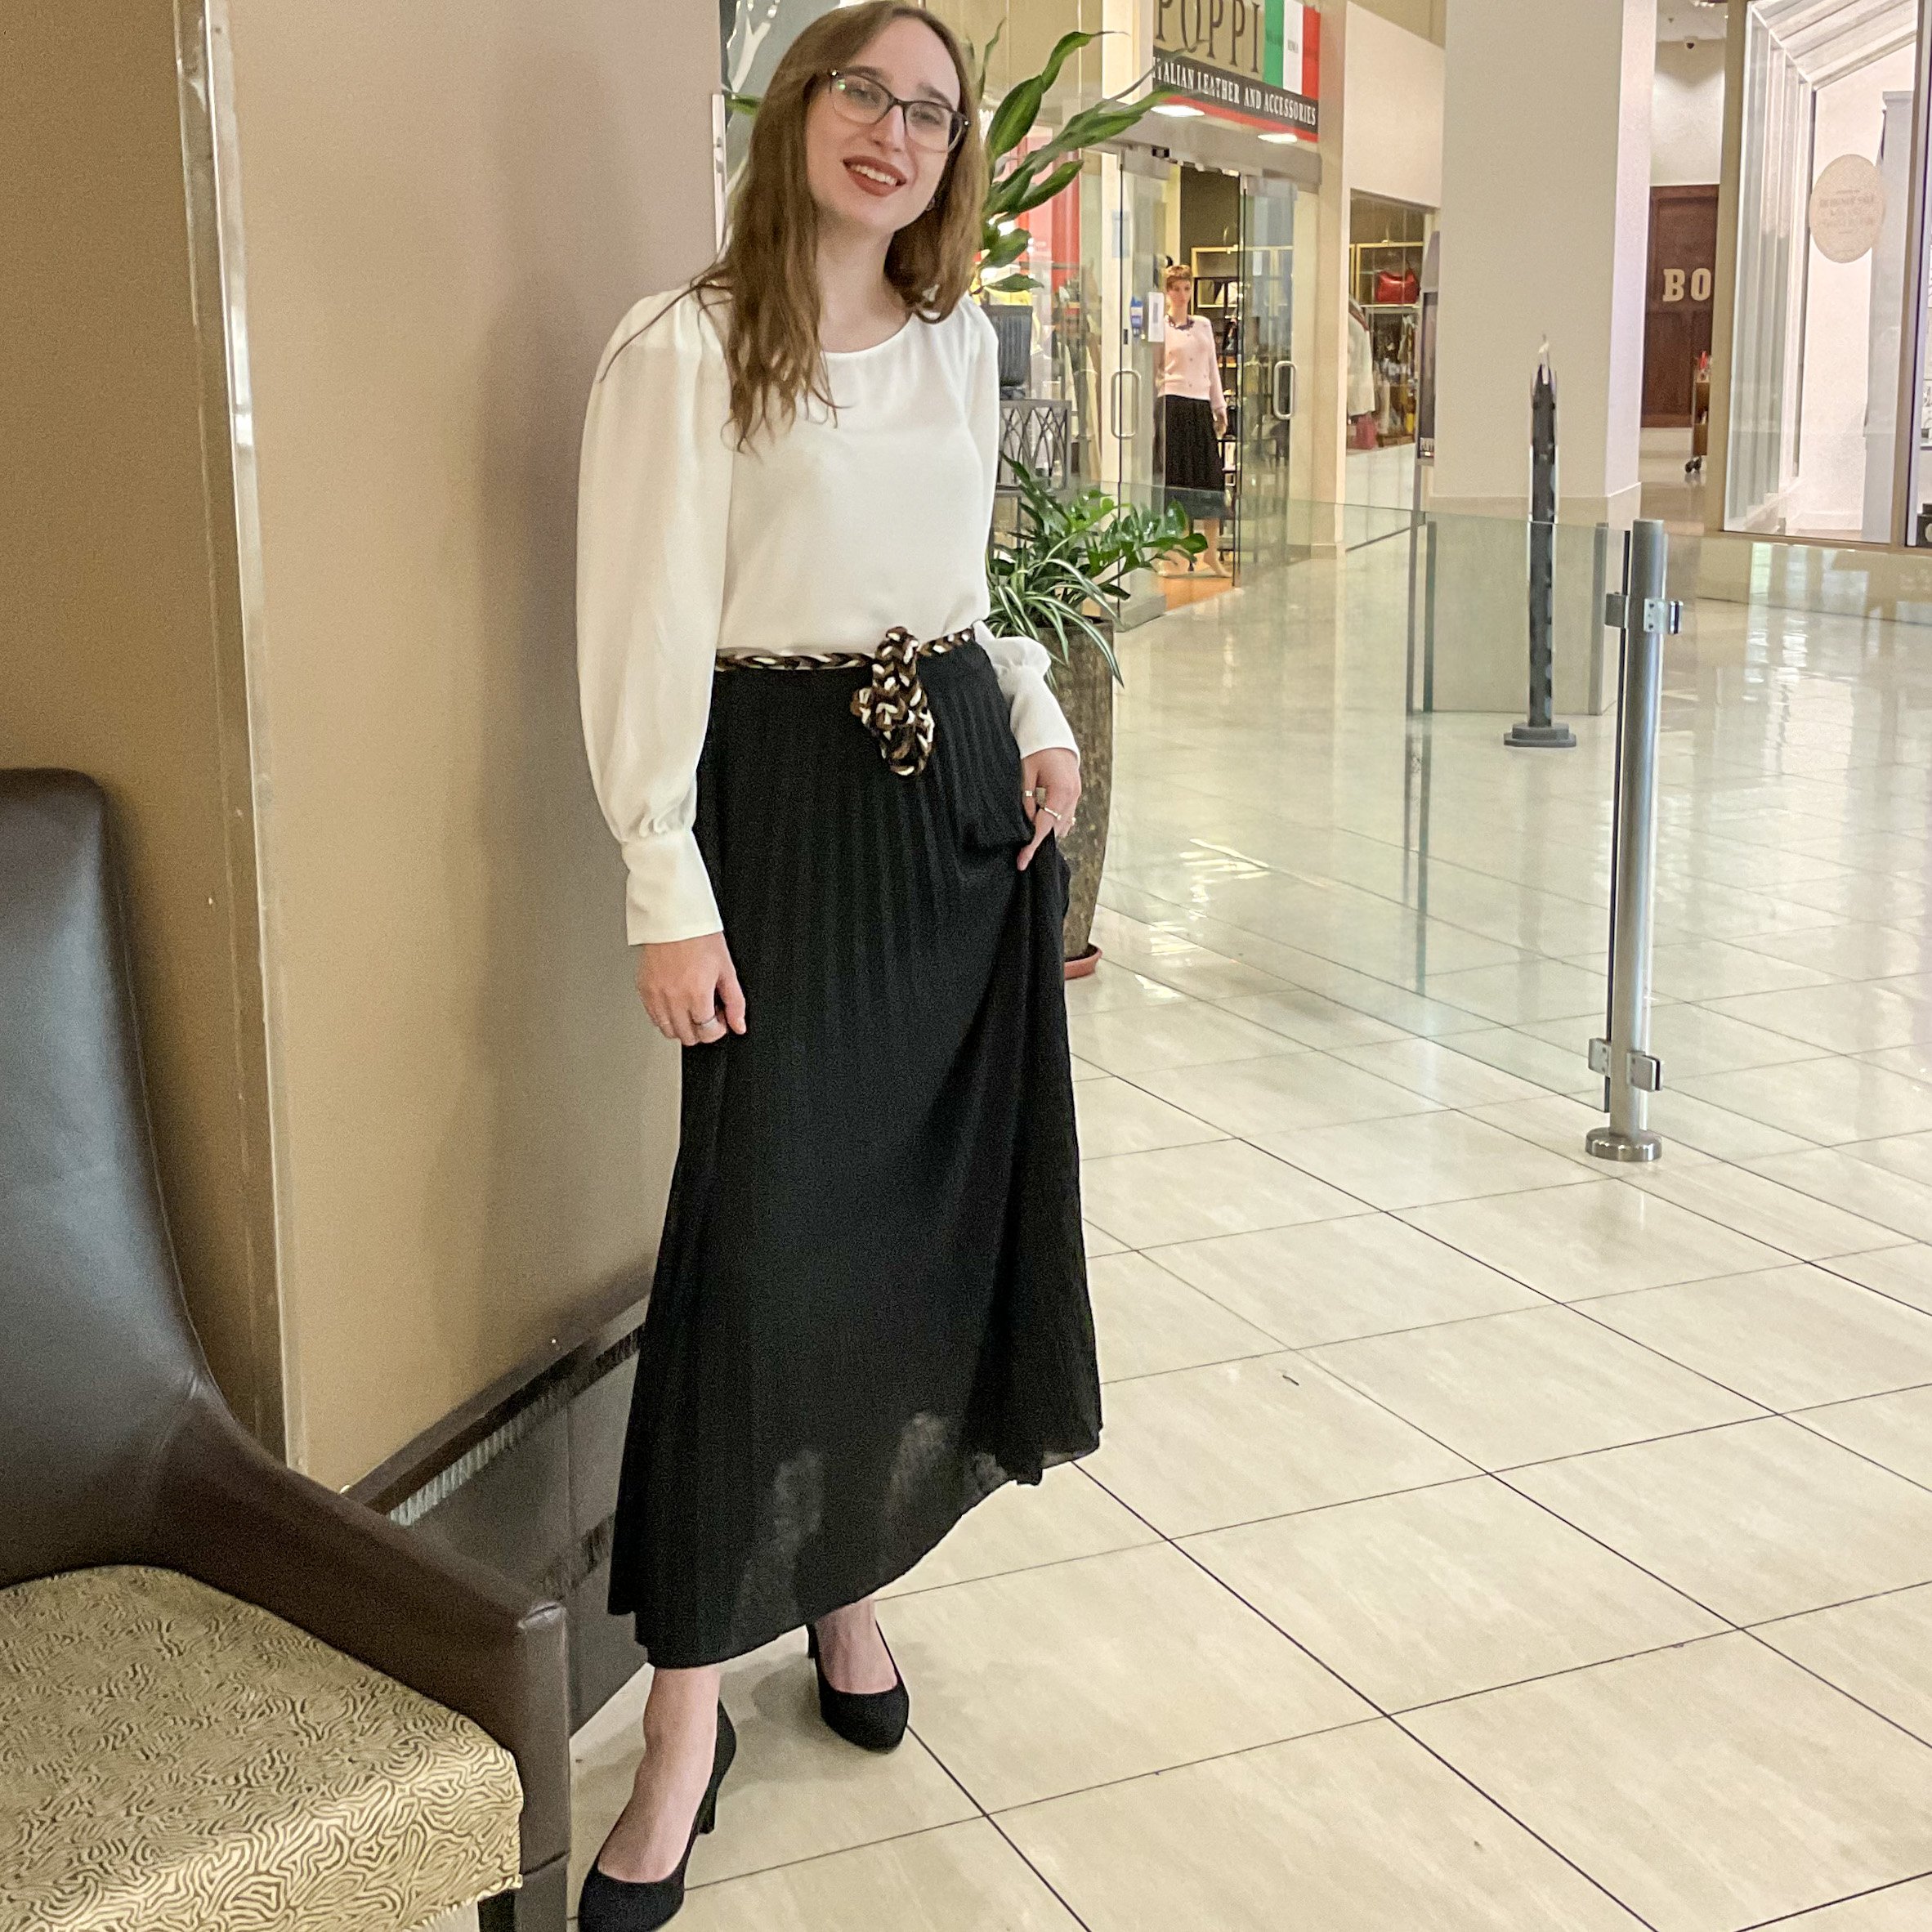 Stylish Spring Outfit: Black Pleated Maxi Skirt and Distressed Denim Jacket